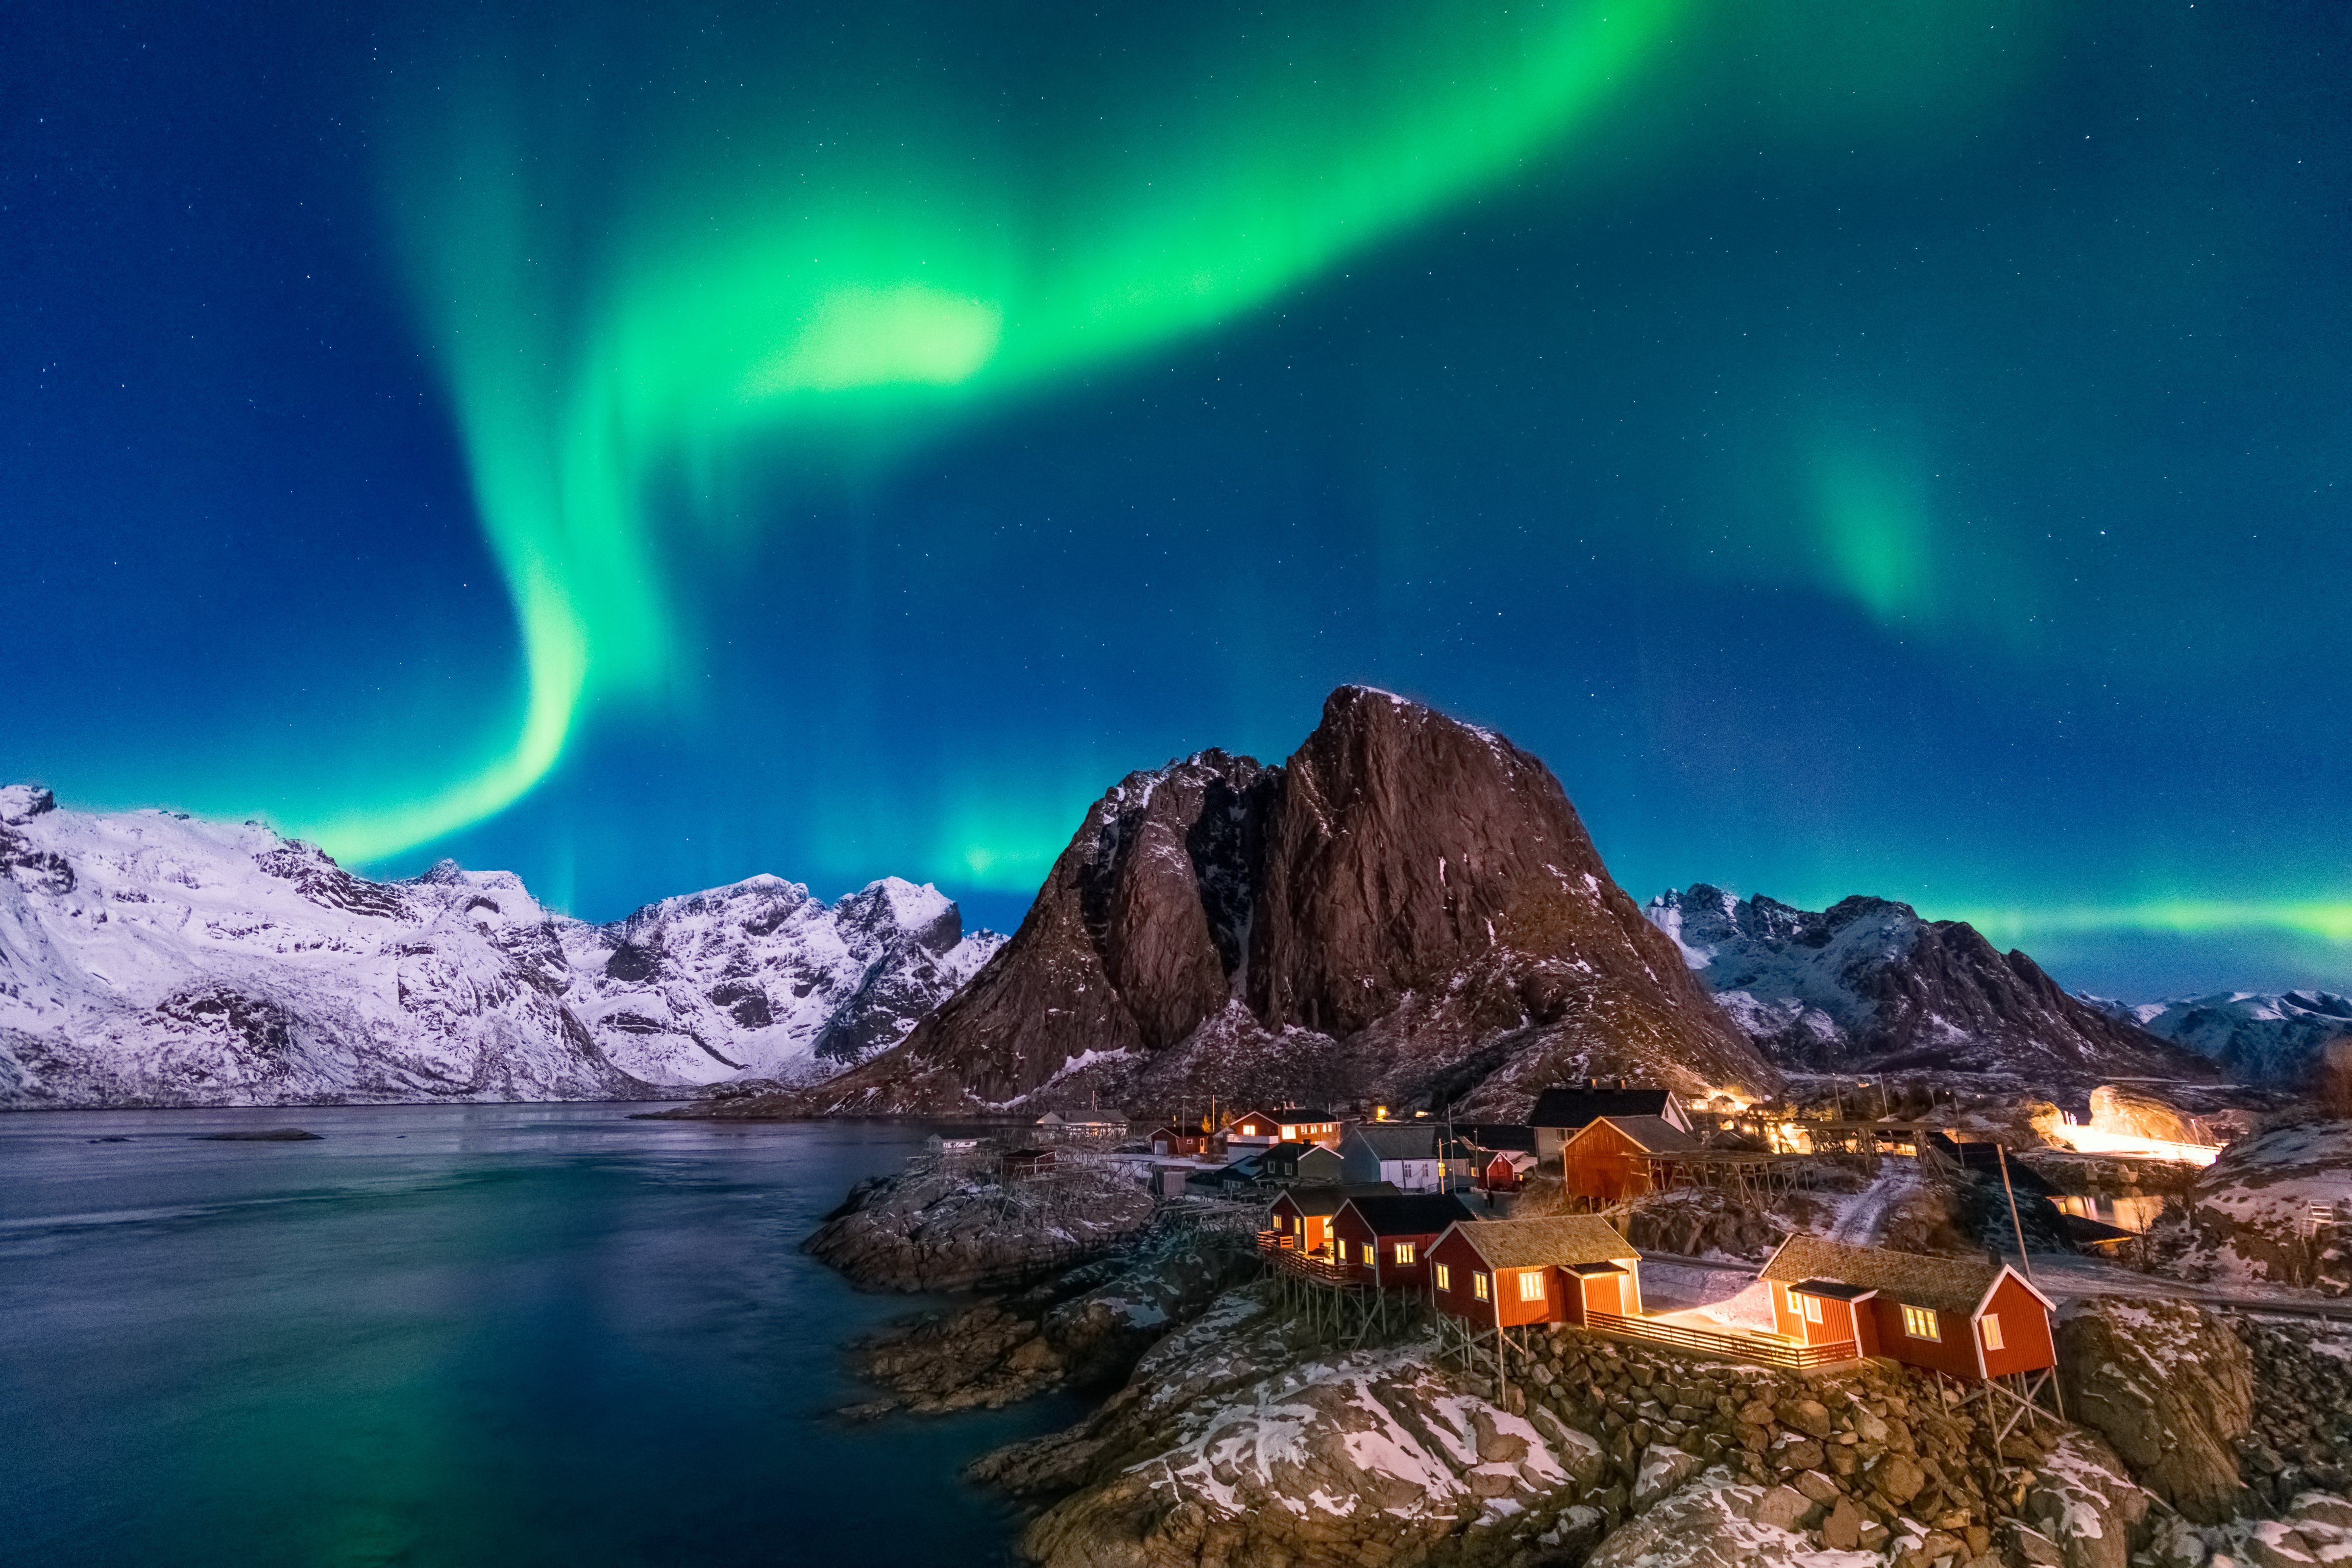 Northern Lights (Aurora Borealis) above the iconic view of a picturesque fishing village in Hamnoy (Hamnøy), Lofoten islands, Norway in winter. (Getty Images/Noppawat Charoensinphon)